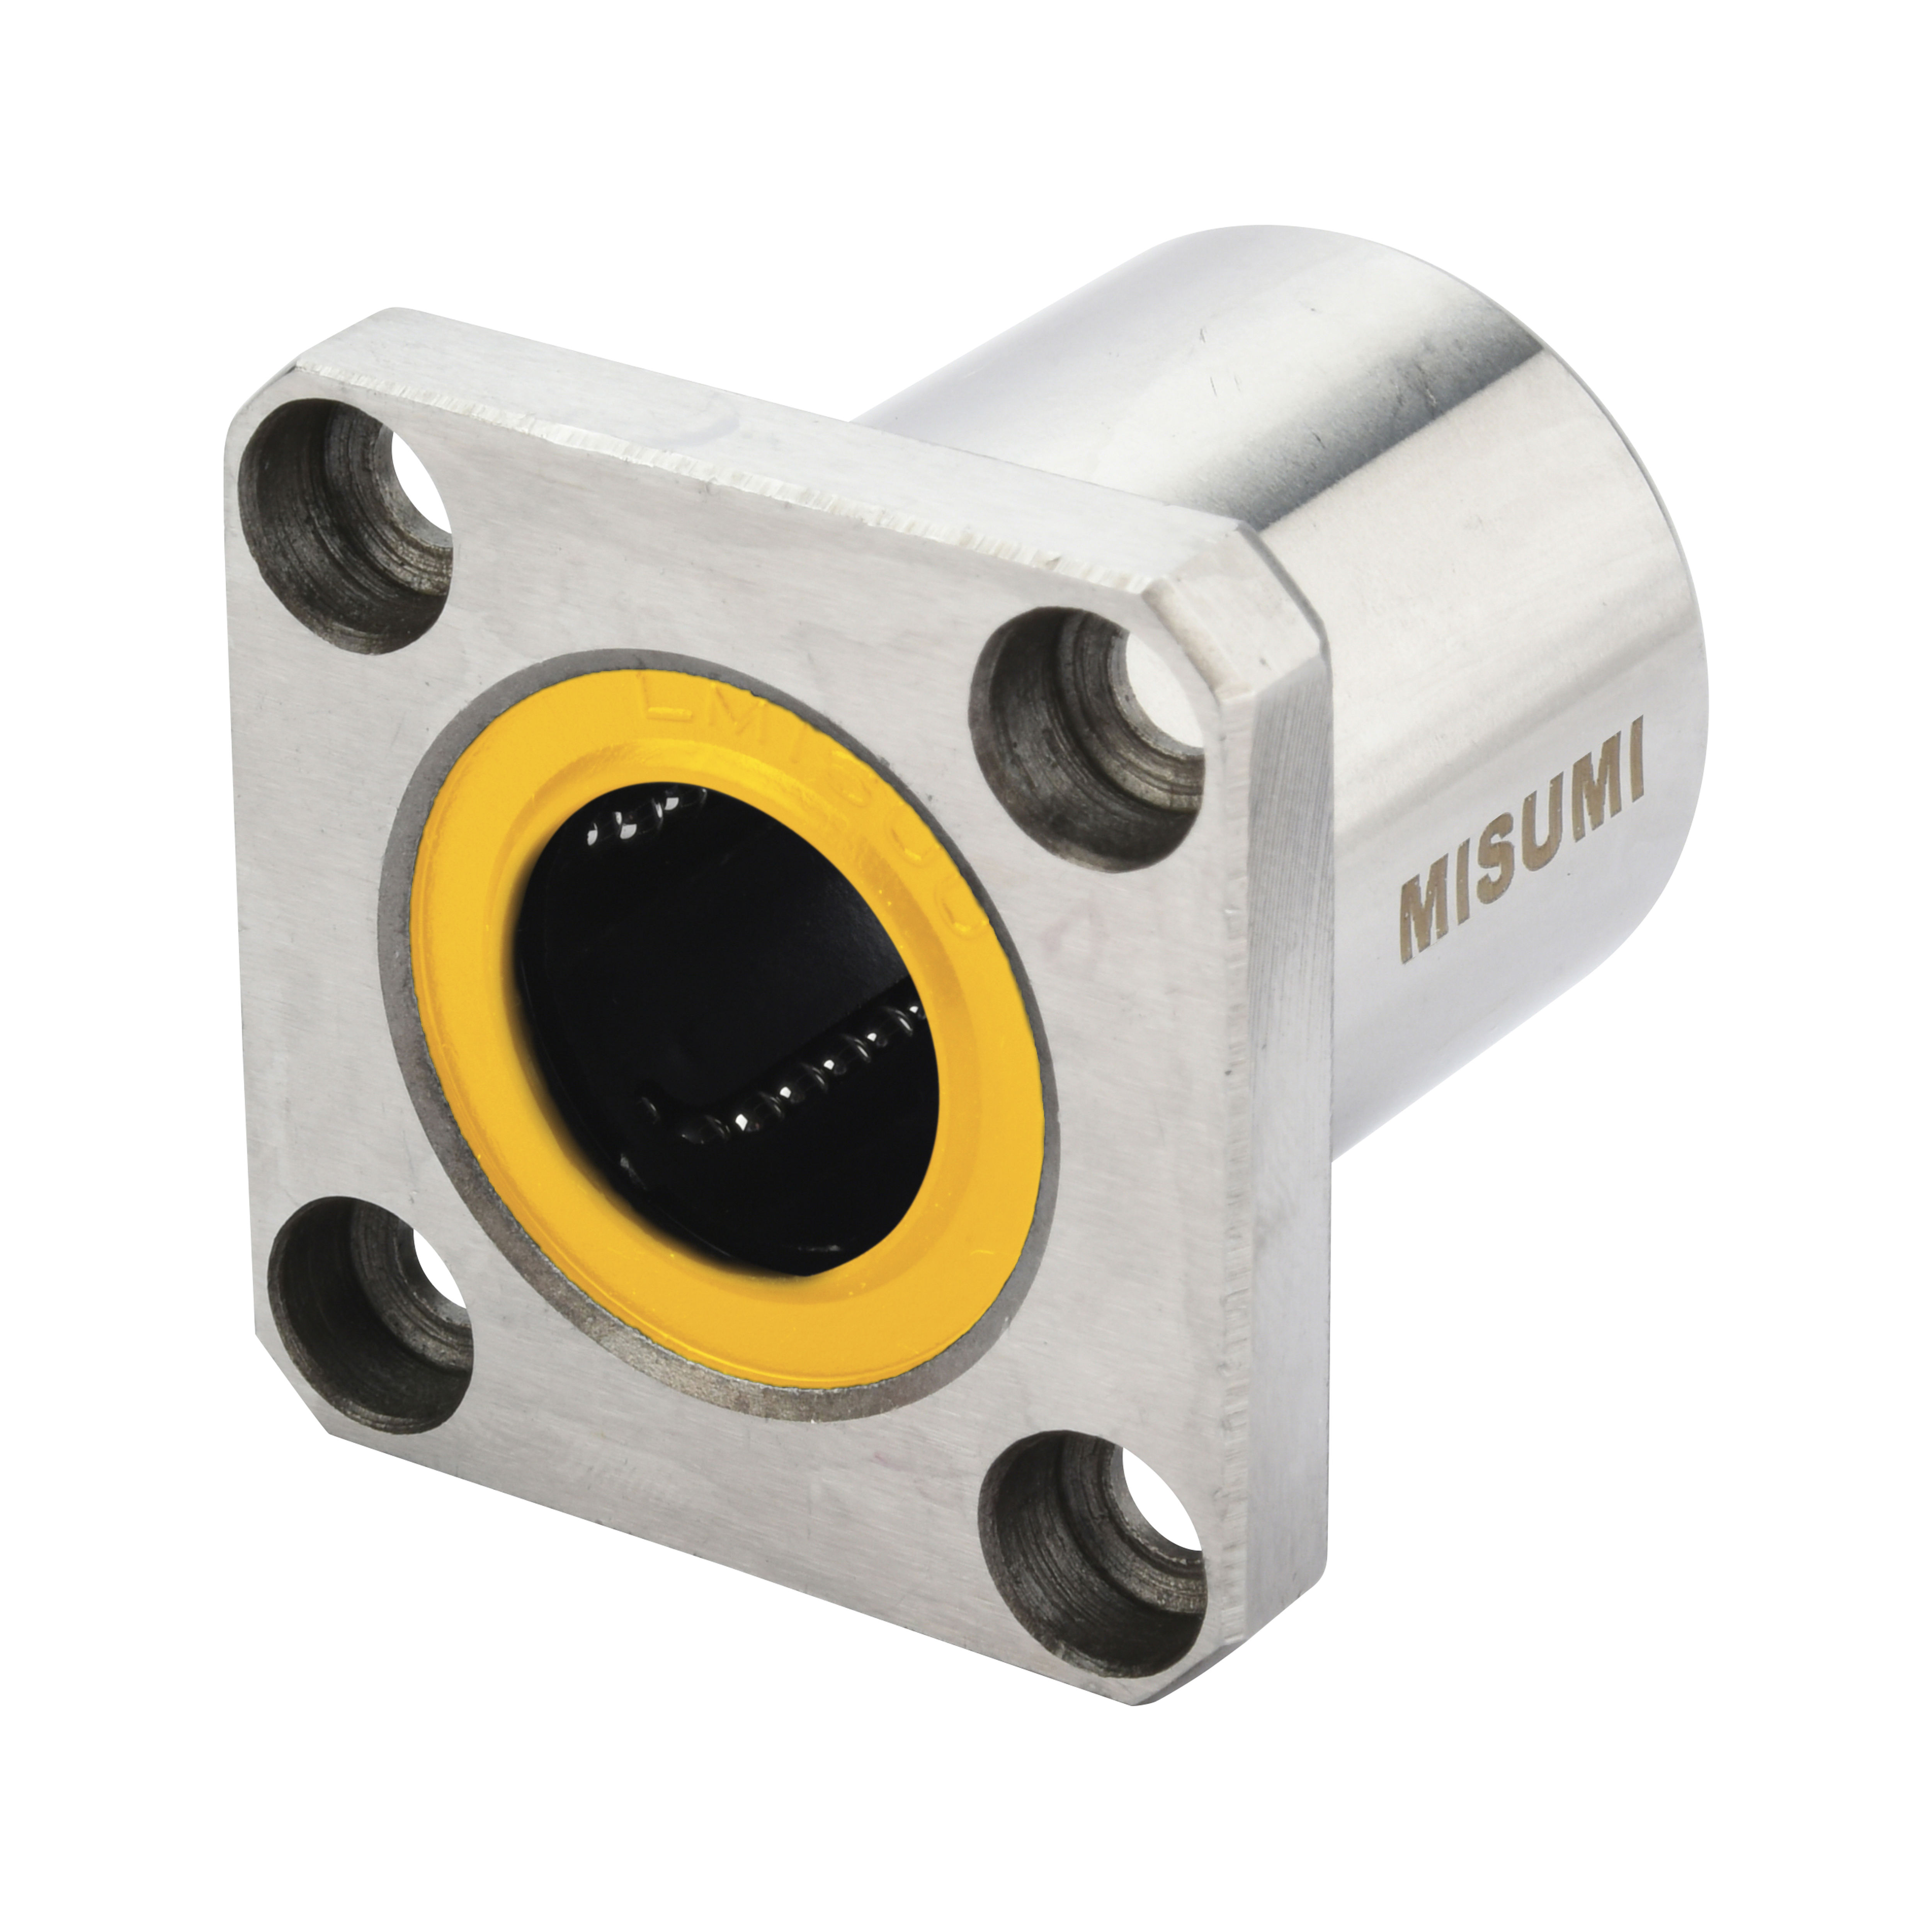 Square Flanged Linear Bushings, Single / Double / Opposite Counterbored Hole (C-LMK8UU) 